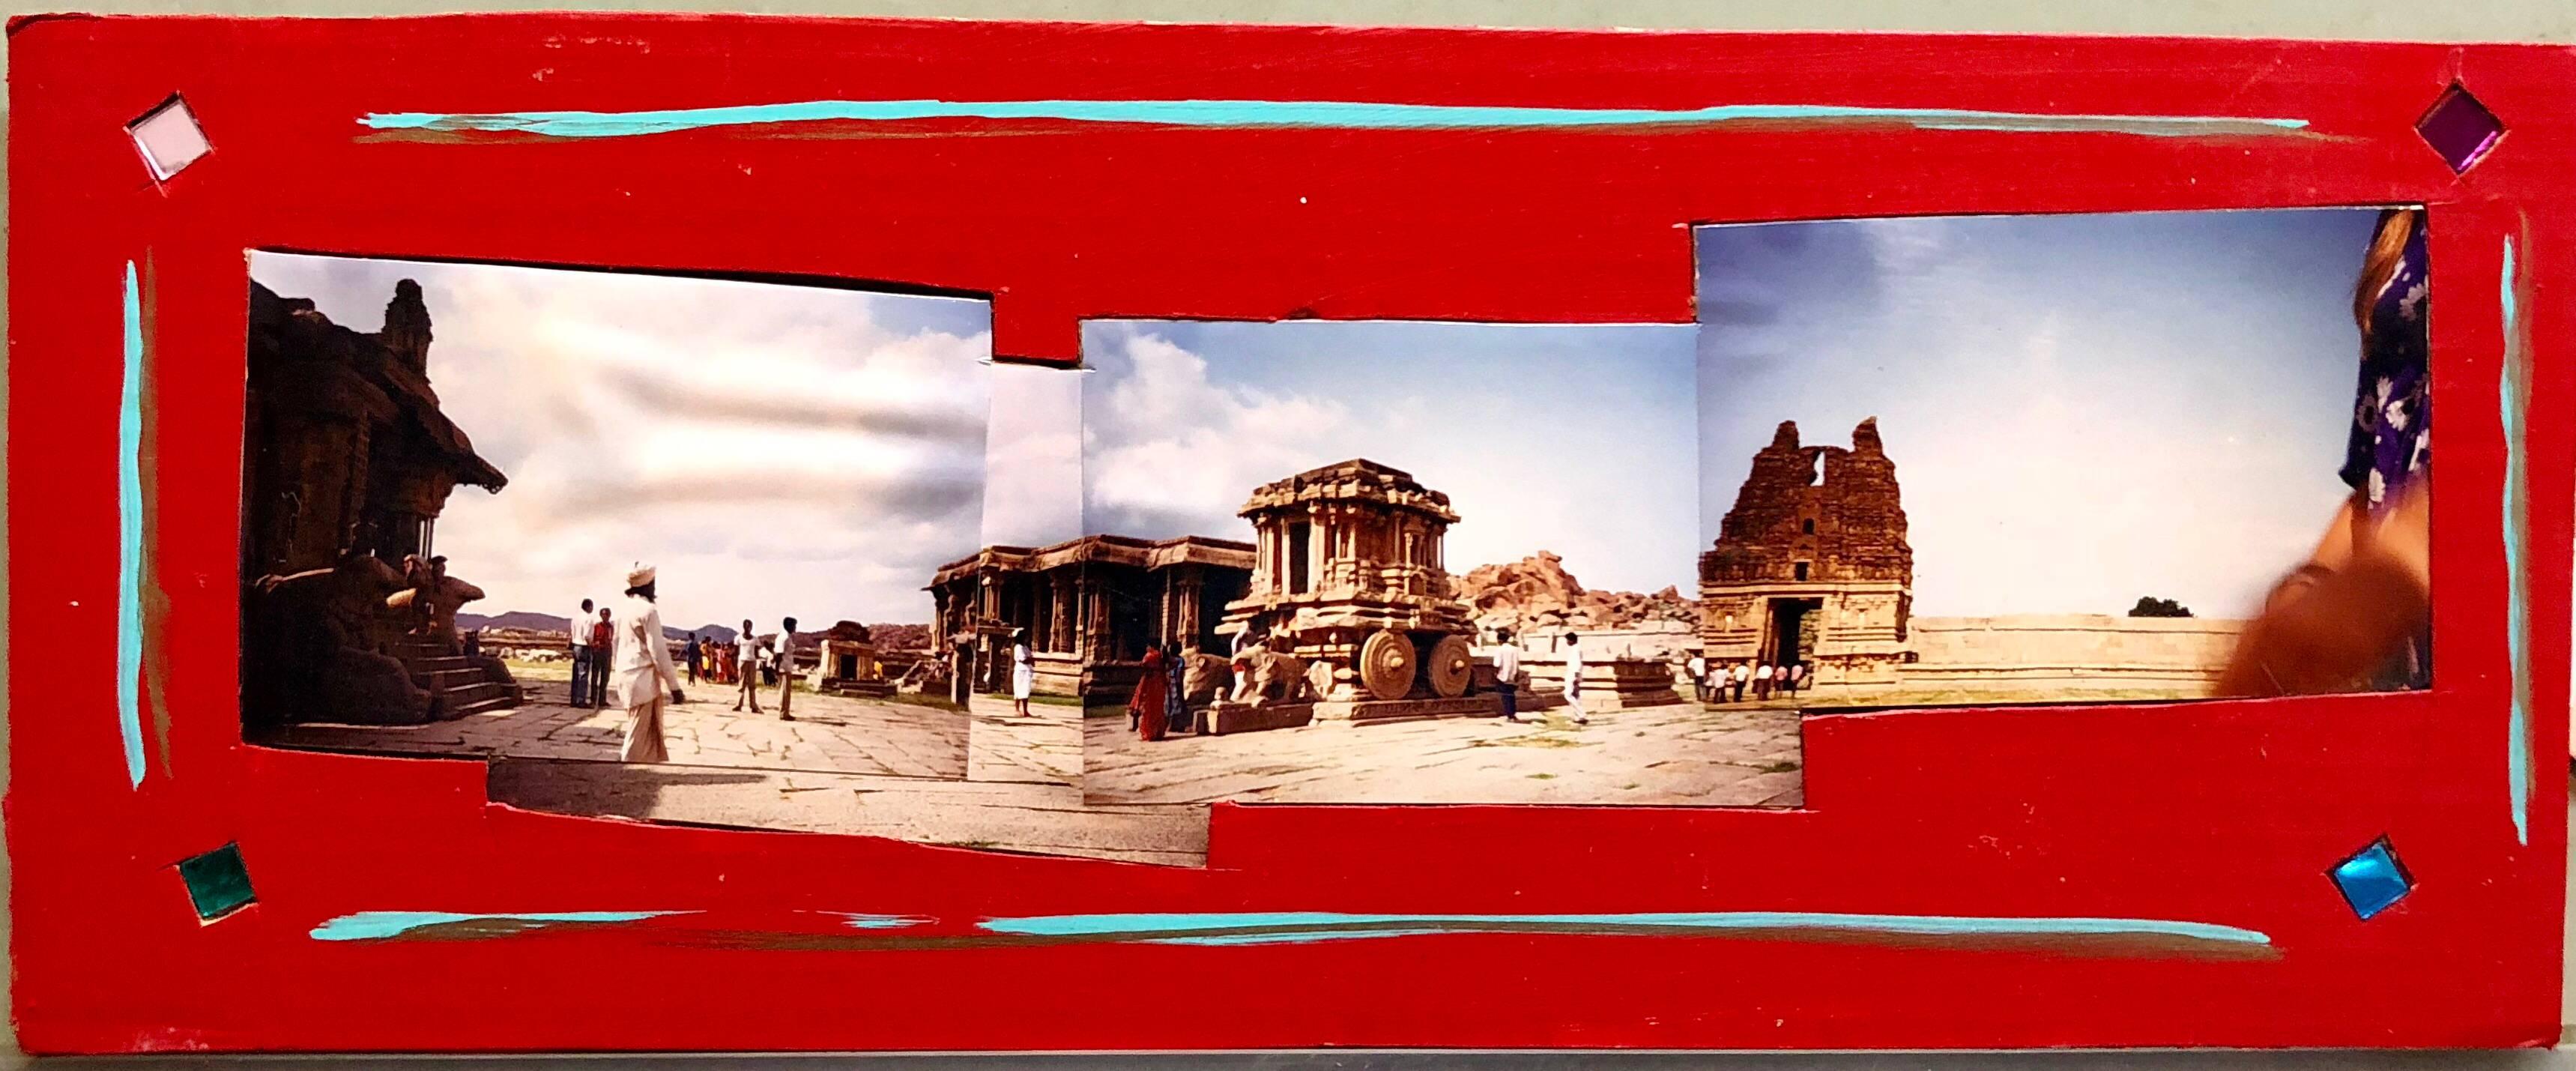 Tourists Hampi, India, 1992, Photo Prints on Cardboard, Collage, Mirror Insets For Sale 4